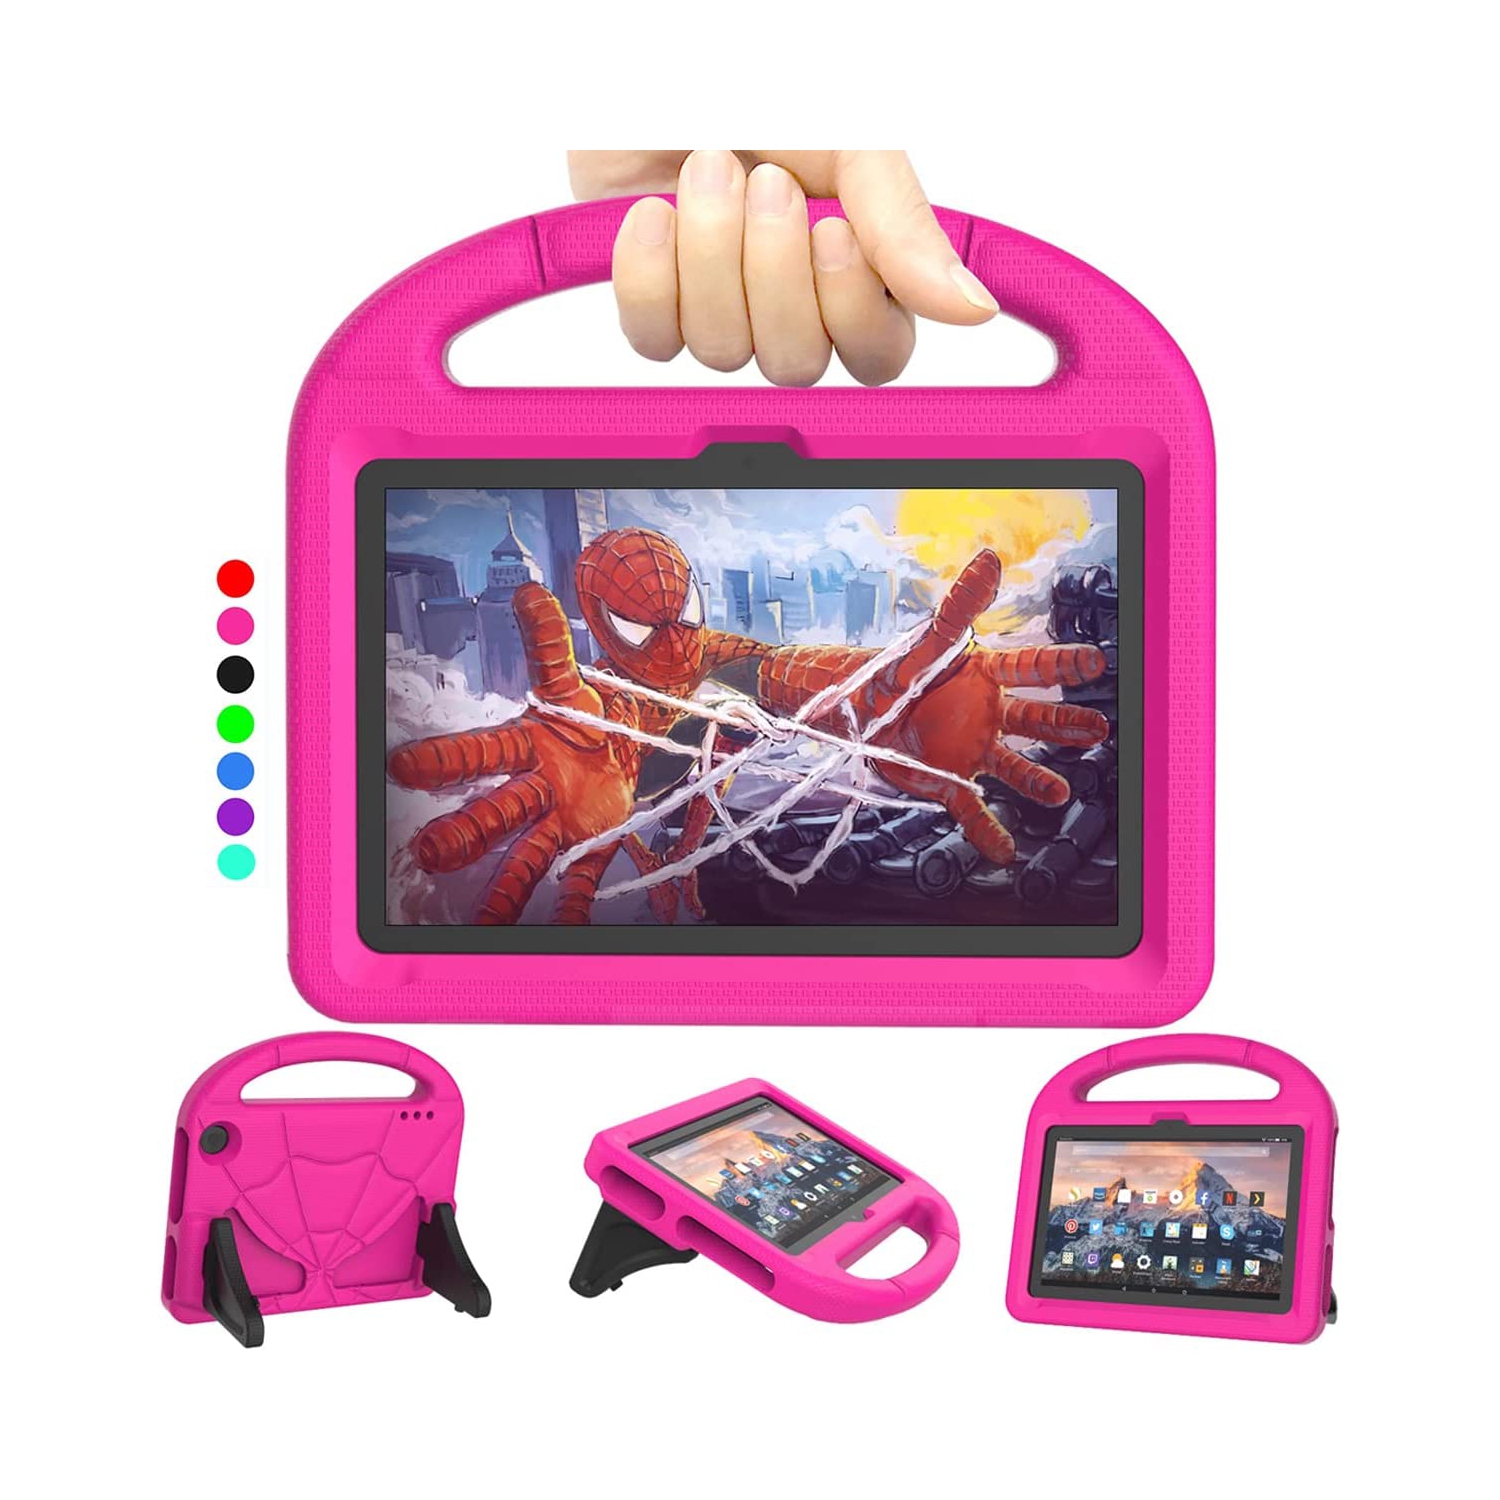 New Fire 7 Tablet Case for Kids 2022 Release(12th Generation) L Fire Tablet 7 Case with Handle Stand Lightweight Durable Shockproof Kid-Proof Cover for Fire 7 Tablet/Kids Tablet 20